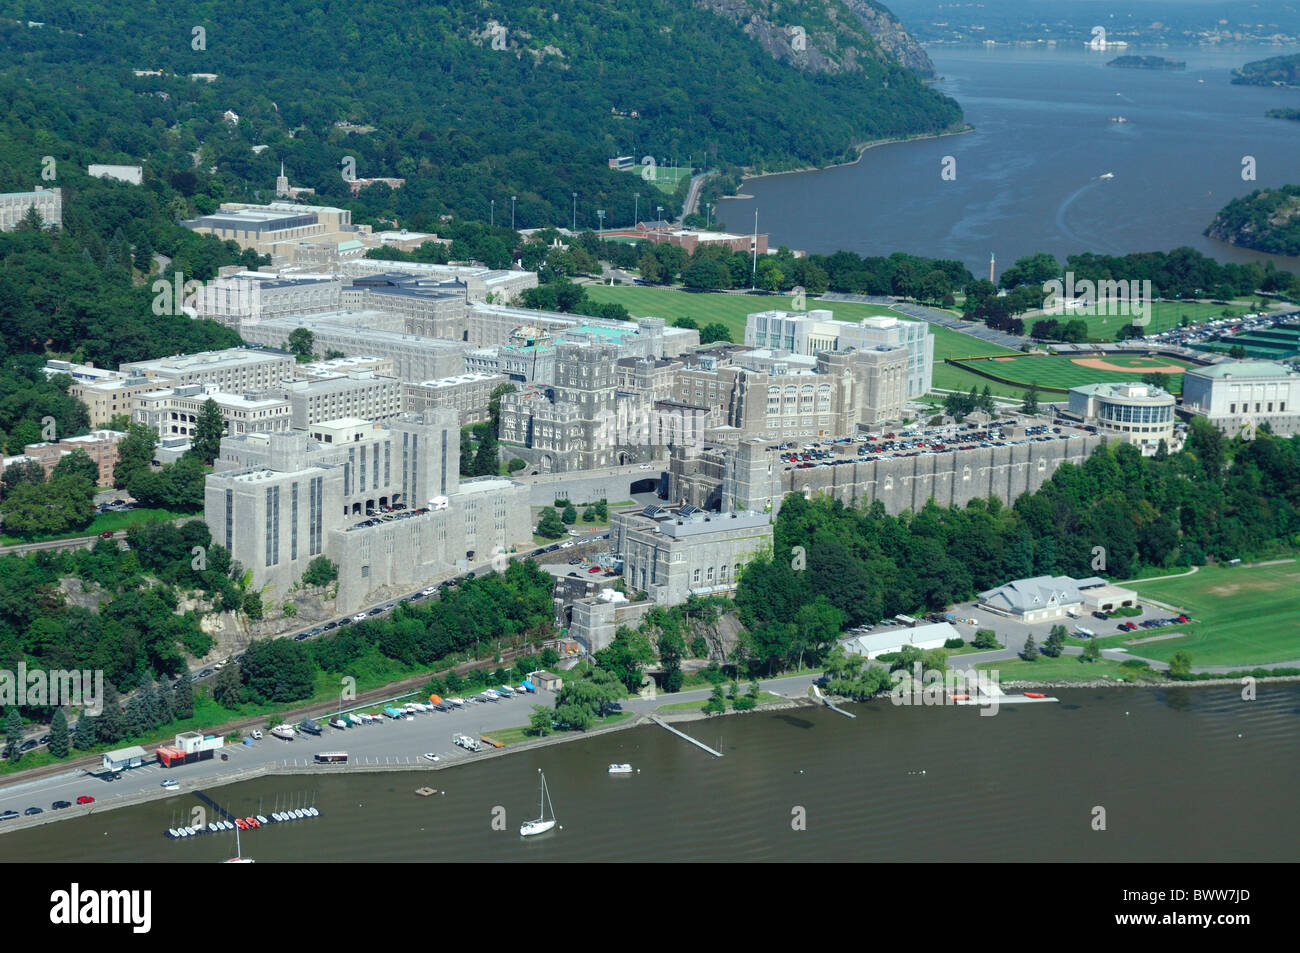 Aerial view of United States Military Academy buildings of West Point on  riverside of Hudson river, New York state, Usa Stock Photo - Alamy